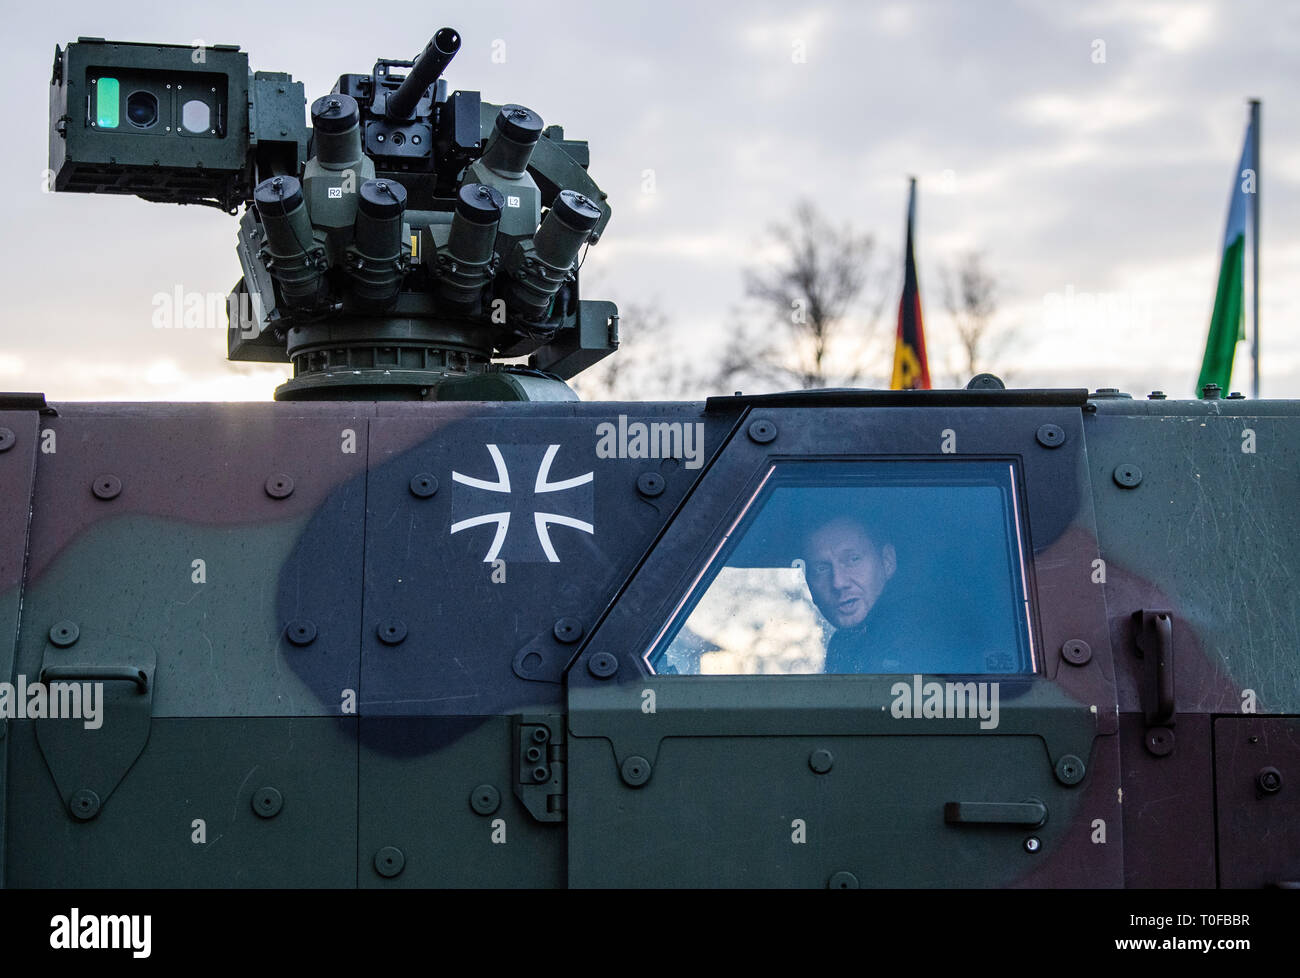 Frankenberg, Germany. 19th Mar, 2019. Michael Kretschmer (CDU), Prime Minister of Saxony, sits during a visit of the Panzergrenadierbrigade 37 in a transport vehicle Dingo and looks out of the window. Kretschmer visited the unit to find out about its performance and to talk to soldiers. Credit: Robert Michael/dpa-Zentralbild/dpa/Alamy Live News Stock Photo